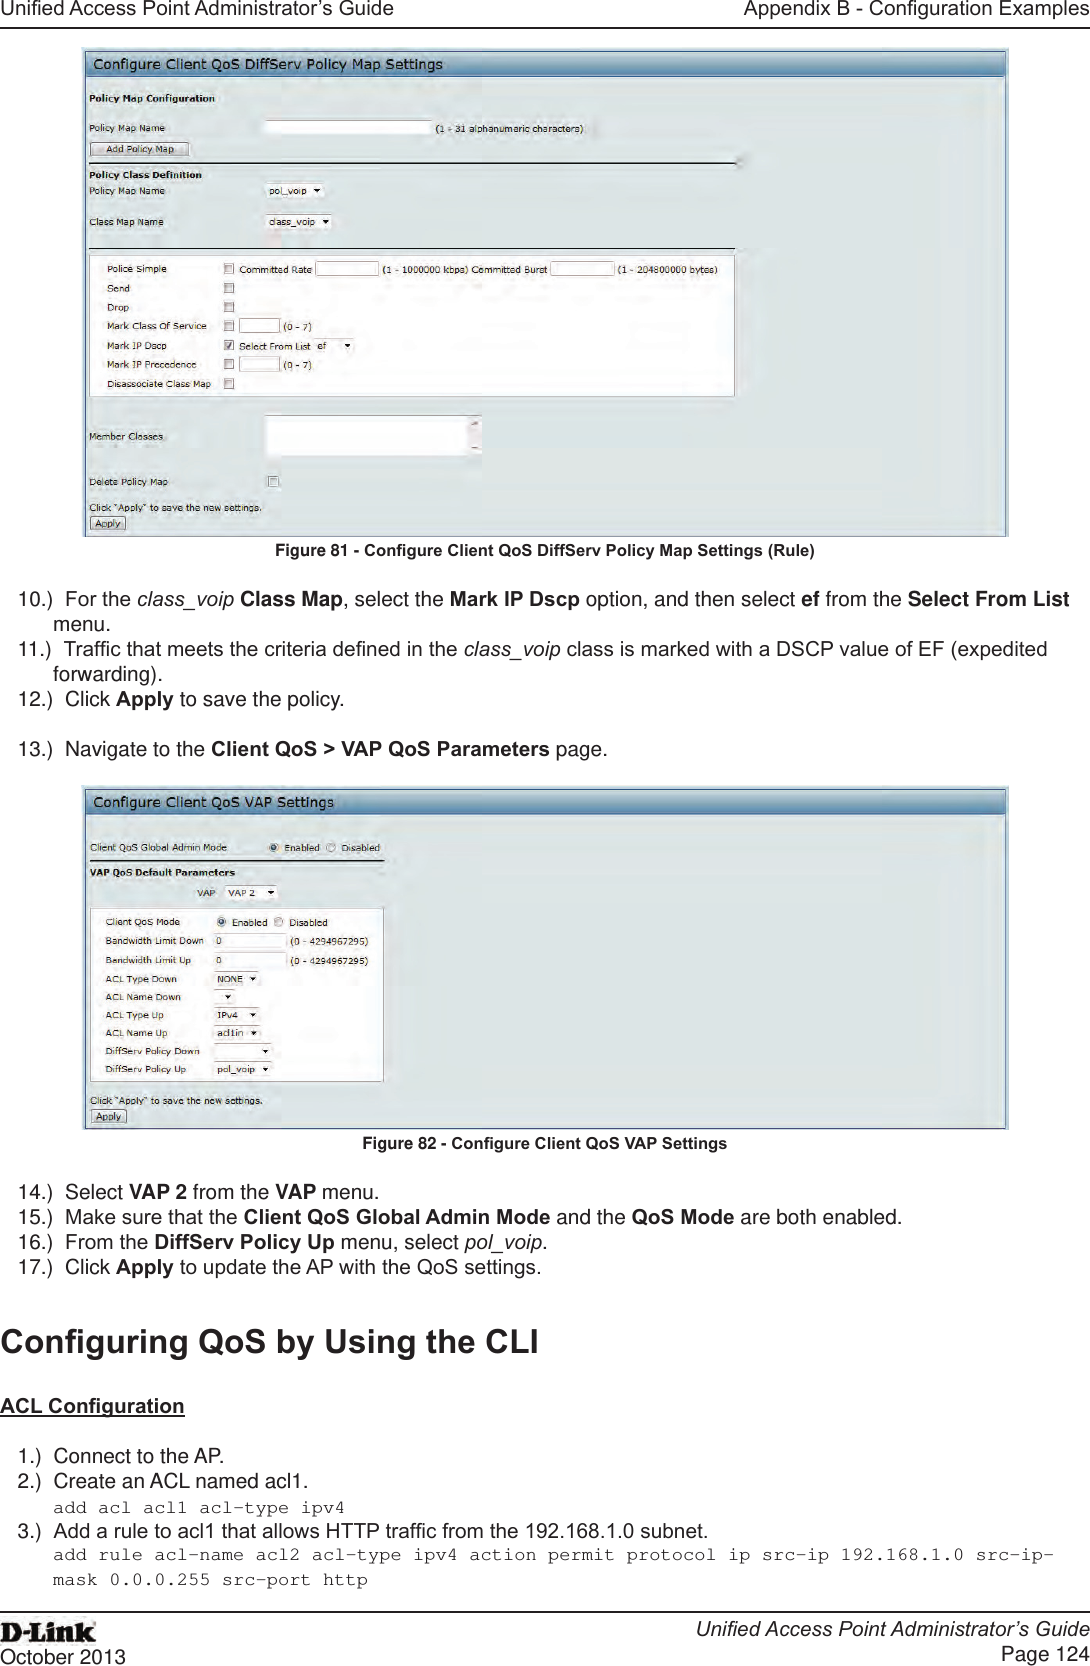 Unied Access Point Administrator’s GuideUnied Access Point Administrator’s GuidePage 124October 2013Appendix B - Conguration ExamplesFigure 81 - Congure Client QoS DiffServ Policy Map Settings (Rule)10.)  For the class_voip Class Map, select the Mark IP Dscp option, and then select ef from the Select From List menu. 11.)  Trafc that meets the criteria dened in the class_voip class is marked with a DSCP value of EF (expedited forwarding).12.)  Click Apply to save the policy.13.)  Navigate to the Client QoS &gt; VAP QoS Parameters page.Figure 82 - Congure Client QoS VAP Settings14.)  Select VAP 2 from the VAP menu.15.)  Make sure that the Client QoS Global Admin Mode and the QoS Mode are both enabled.16.)  From the DiffServ Policy Up menu, select pol_voip.17.)  Click Apply to update the AP with the QoS settings.Conguring QoS by Using the CLIACL Conguration1.)  Connect to the AP.2.)  Create an ACL named acl1.add acl acl1 acl-type ipv43.)  Add a rule to acl1 that allows HTTP trafc from the 192.168.1.0 subnet. add rule acl-name acl2 acl-type ipv4 action permit protocol ip src-ip 192.168.1.0 src-ip-mask 0.0.0.255 src-port http